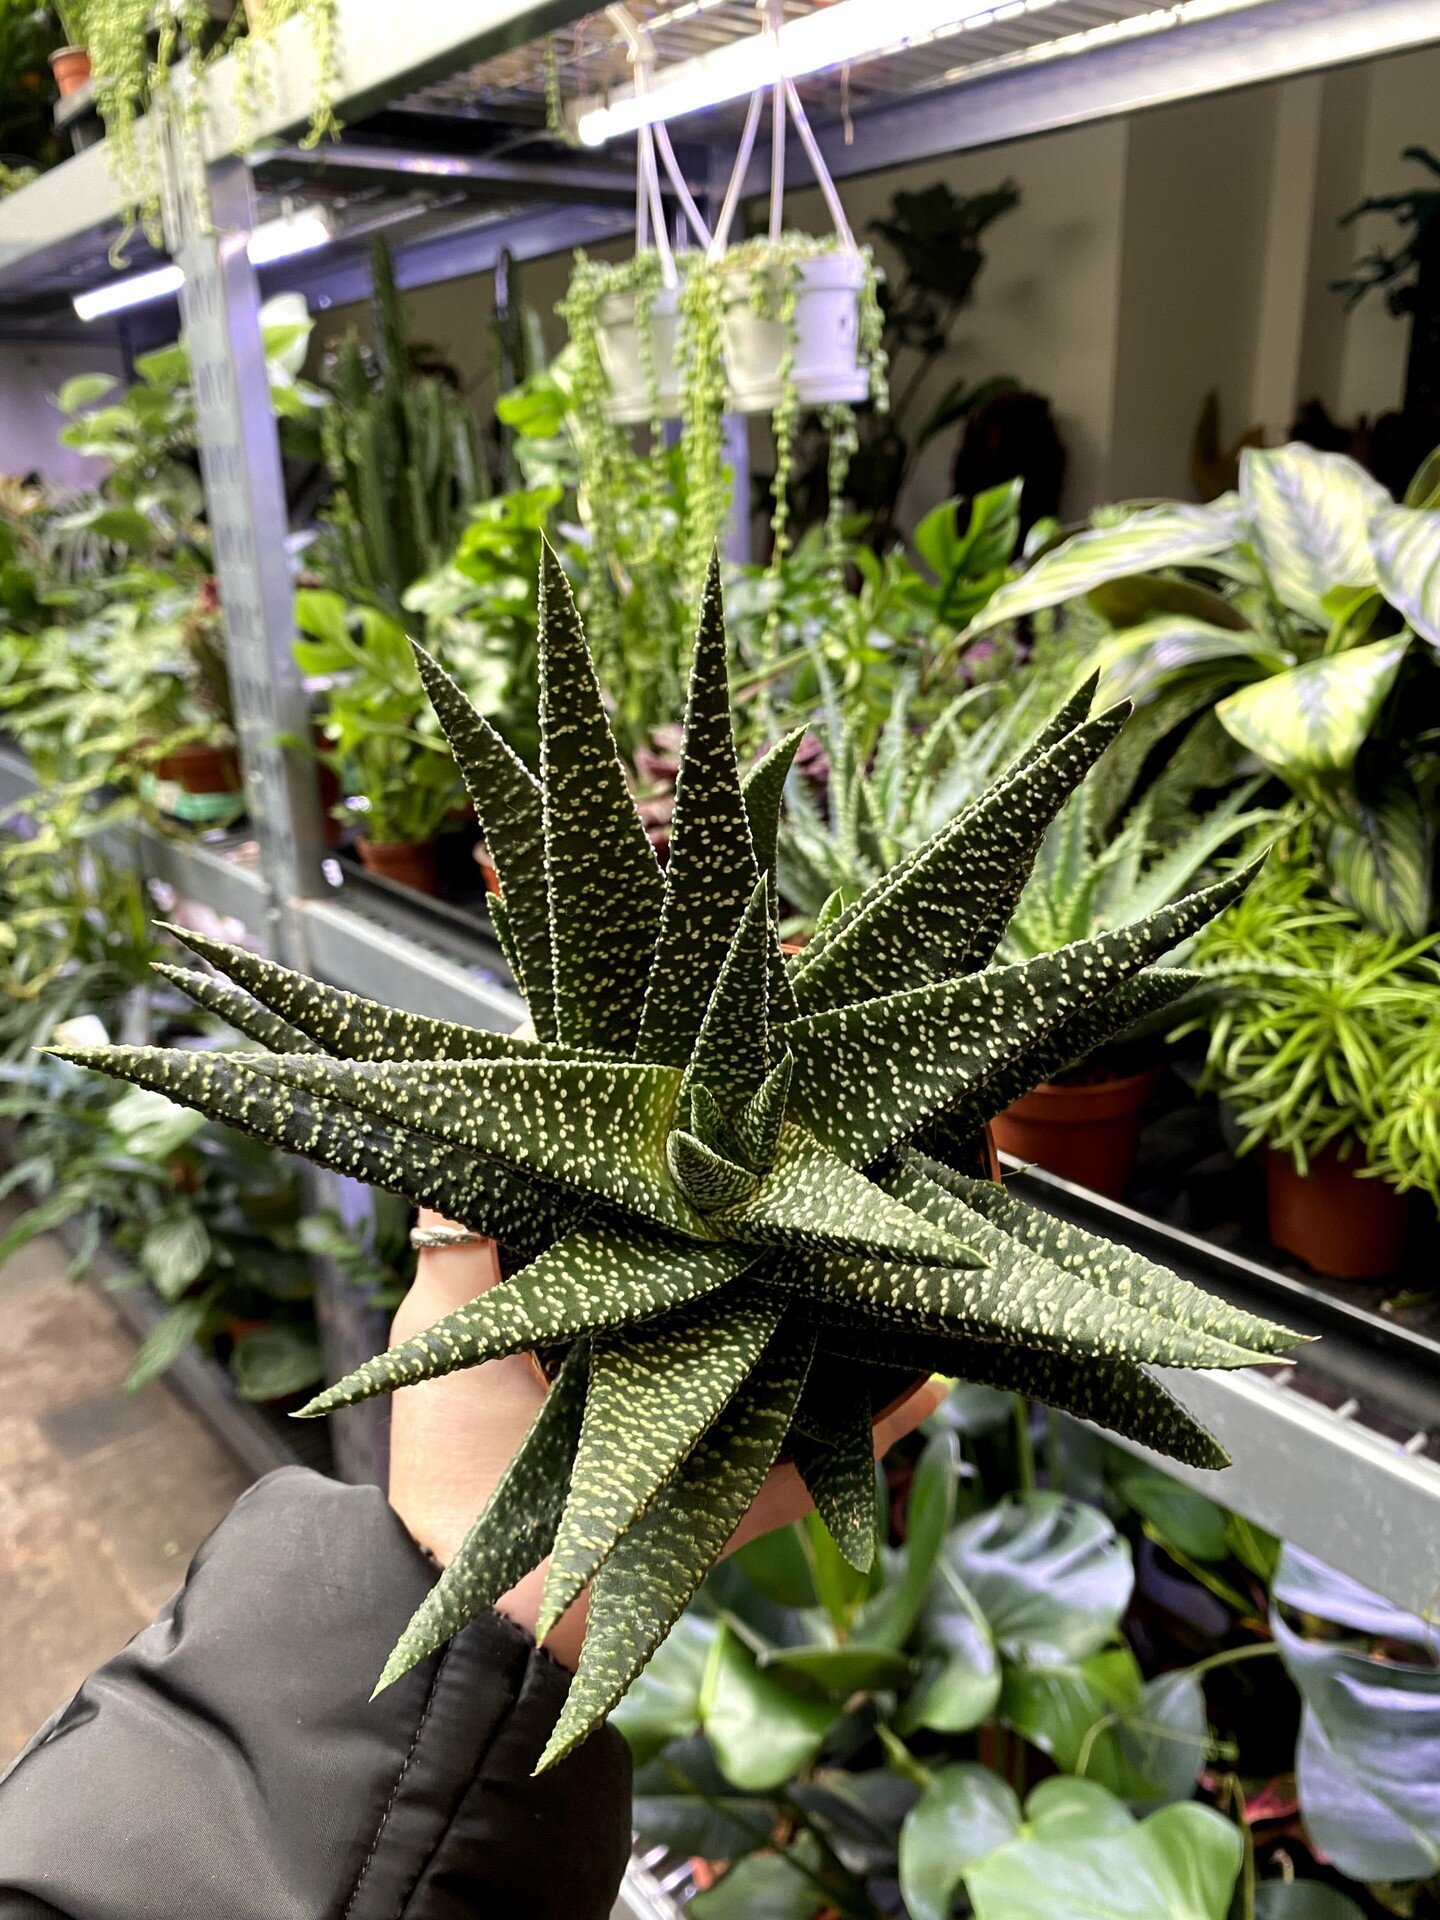 Miss our Friday plant drop? No stress, next orders will be going out on Tuesday!

Weekend opening hours:
Sat 10-5
Sun 10-4

Stop by and say hi ✌47 Park Road / N8 8TE 📍

Plant ref: Haworthia Seastar

#Haworthia #Seastar #succulent #plants #plantshop 